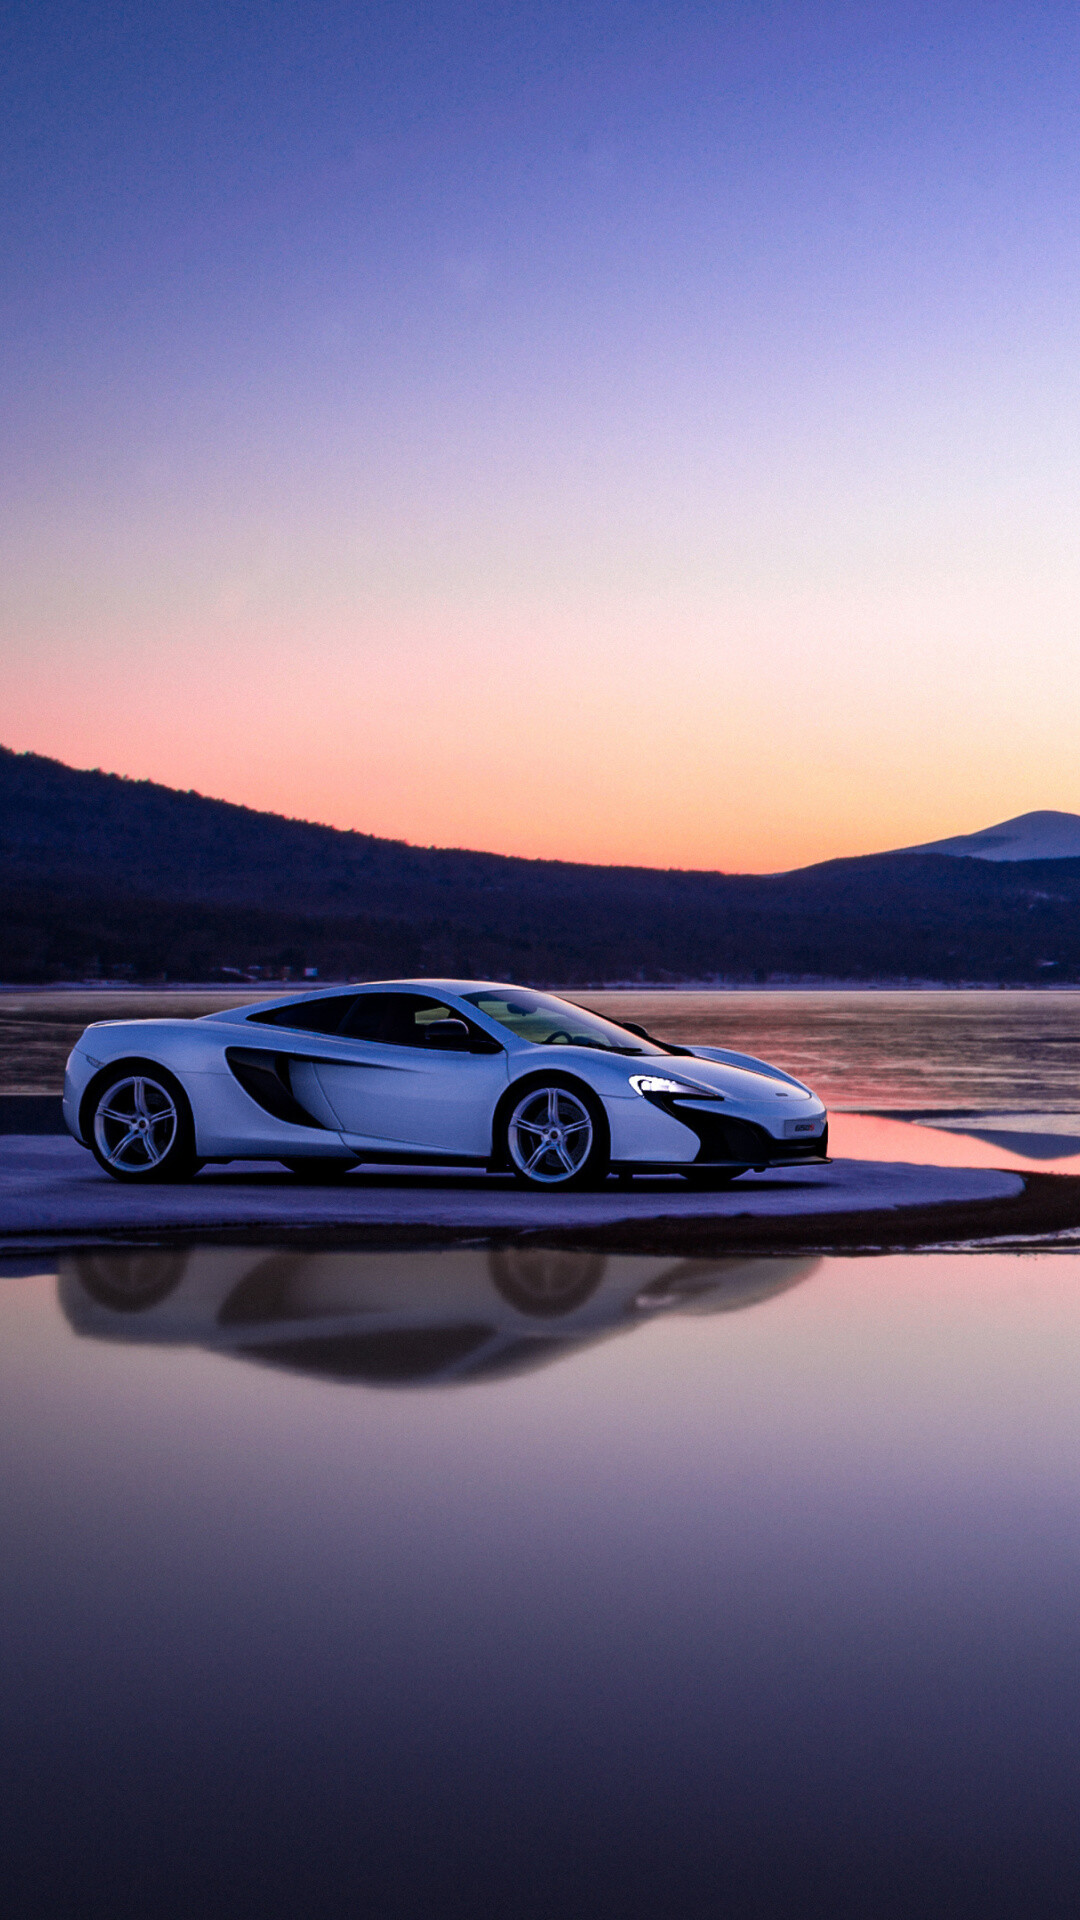 McLaren: The small British sports car manufacturer, Performance vehicles. 1080x1920 Full HD Background.